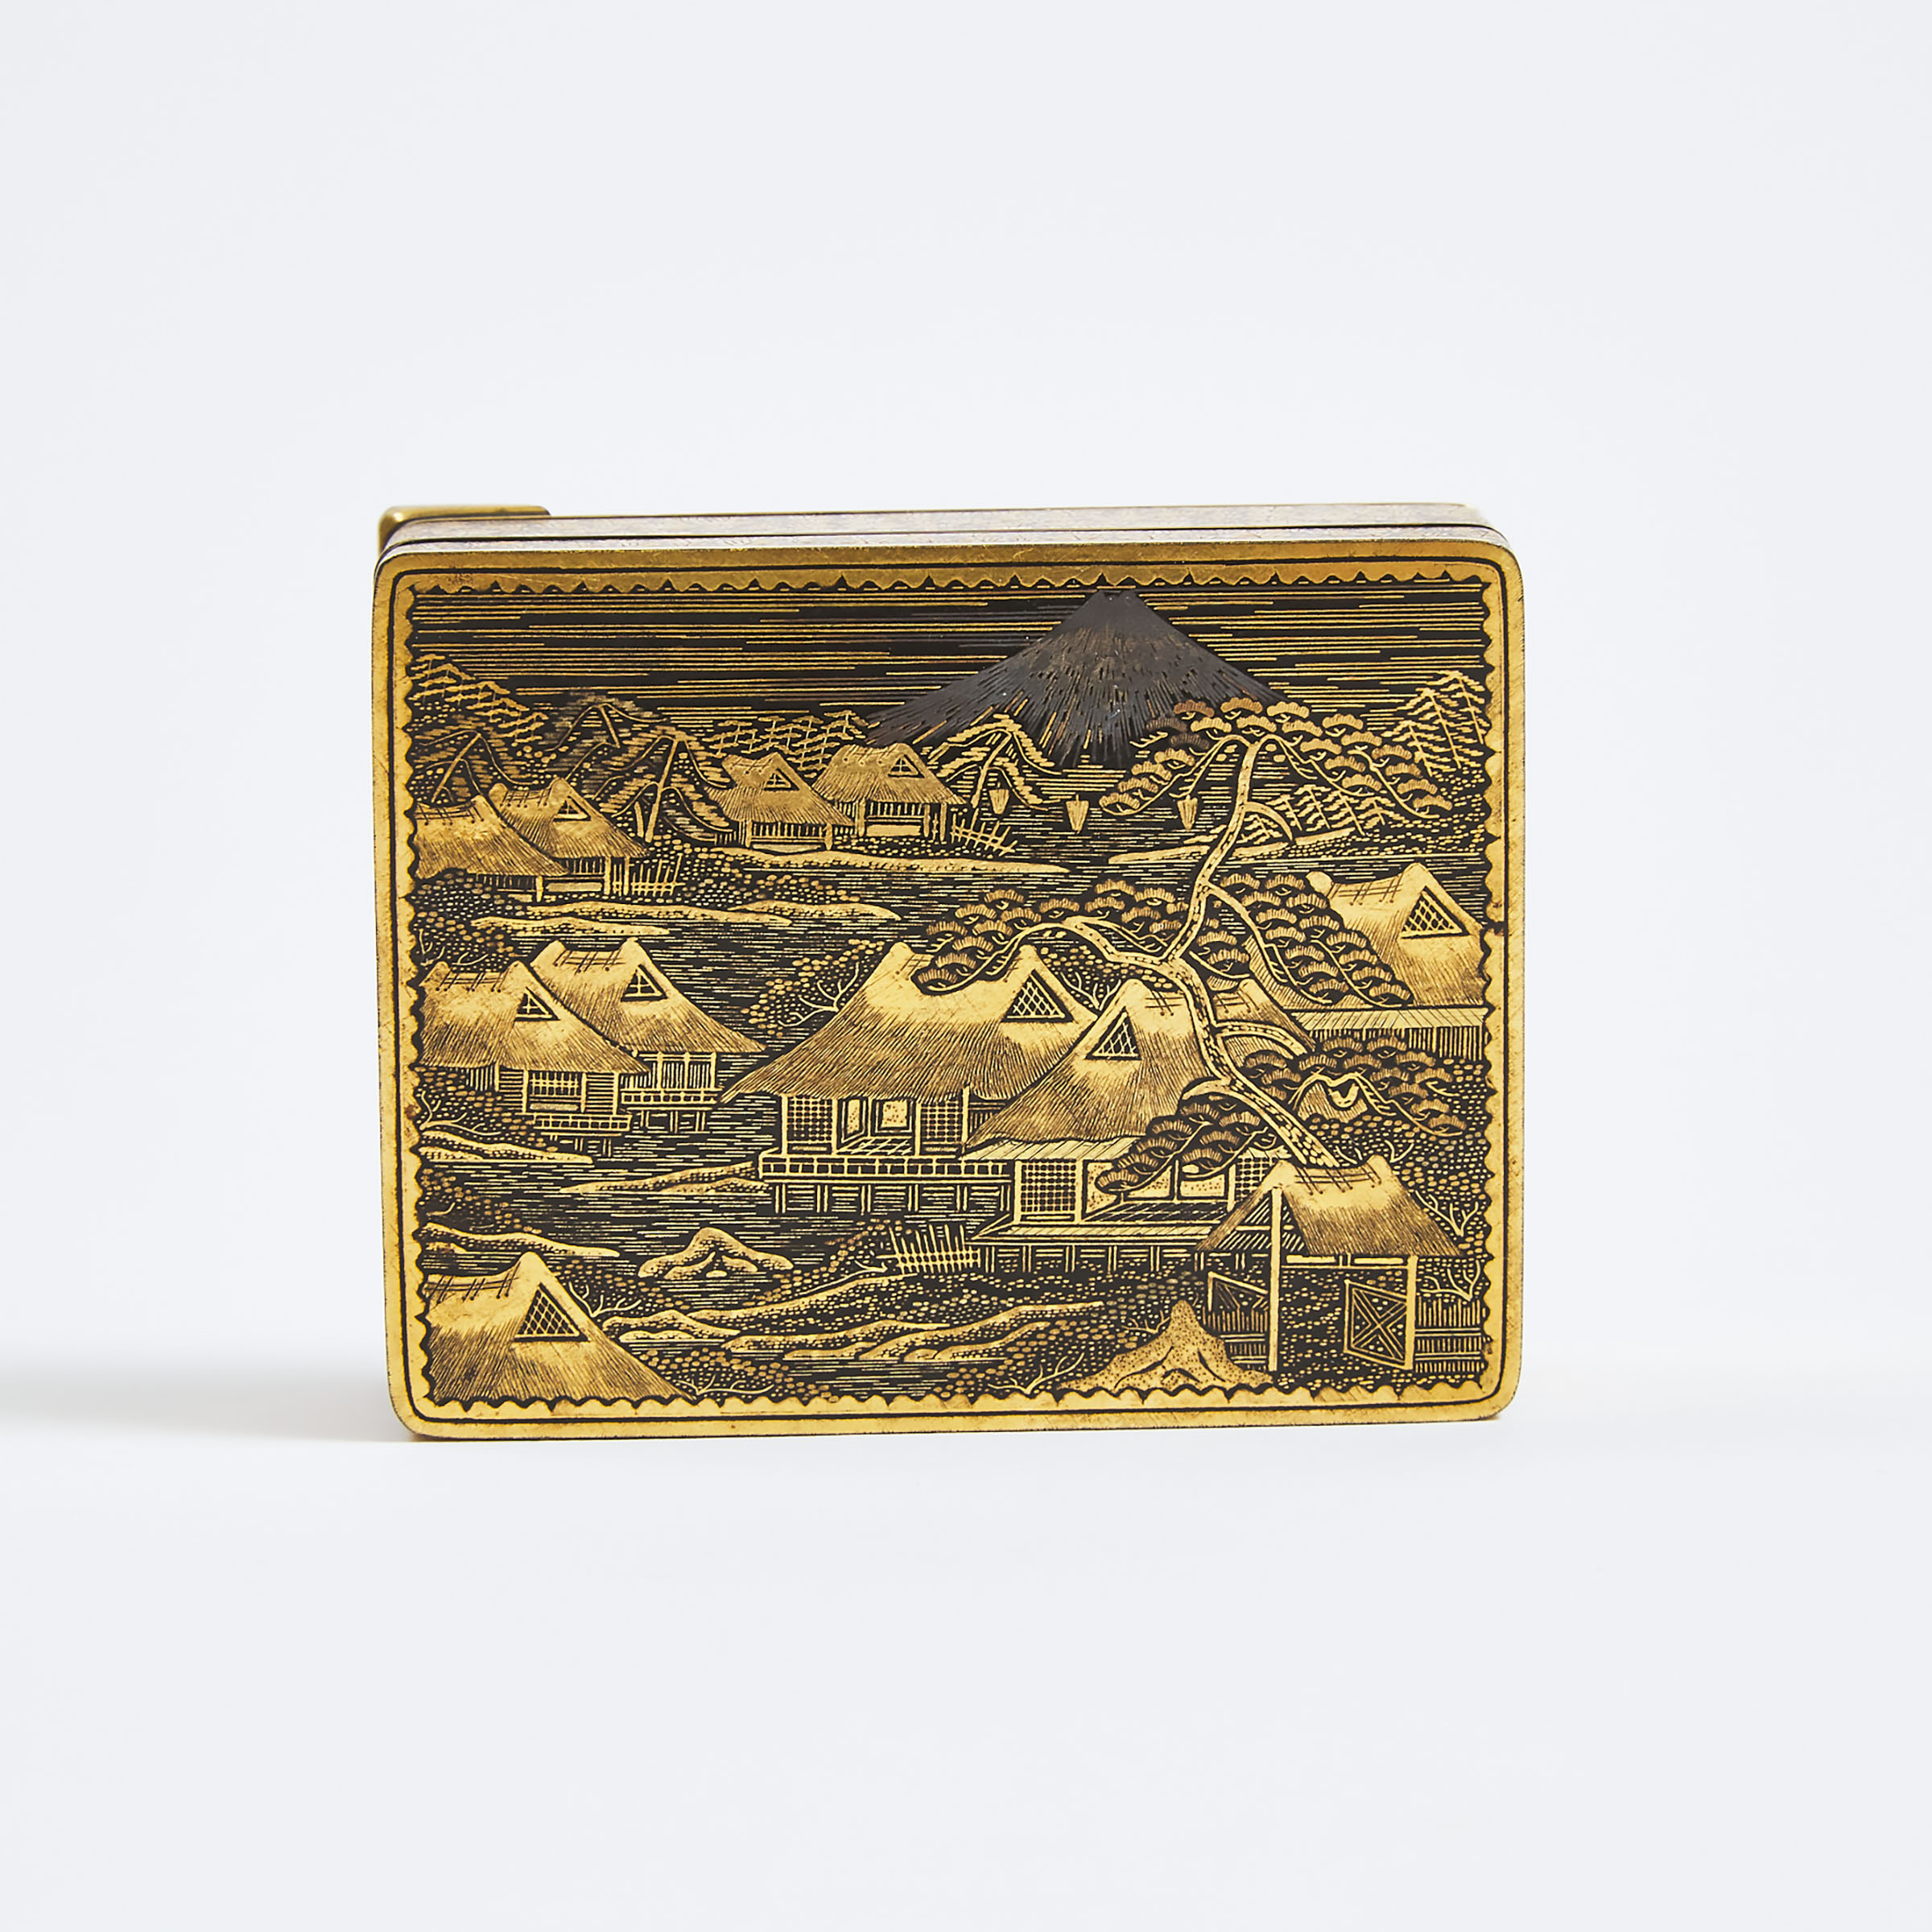 Ashihara School of Komai Company, A Gold and Silver Inlaid Rectangular Box and Cover, Late Meiji/Early Taisho Period